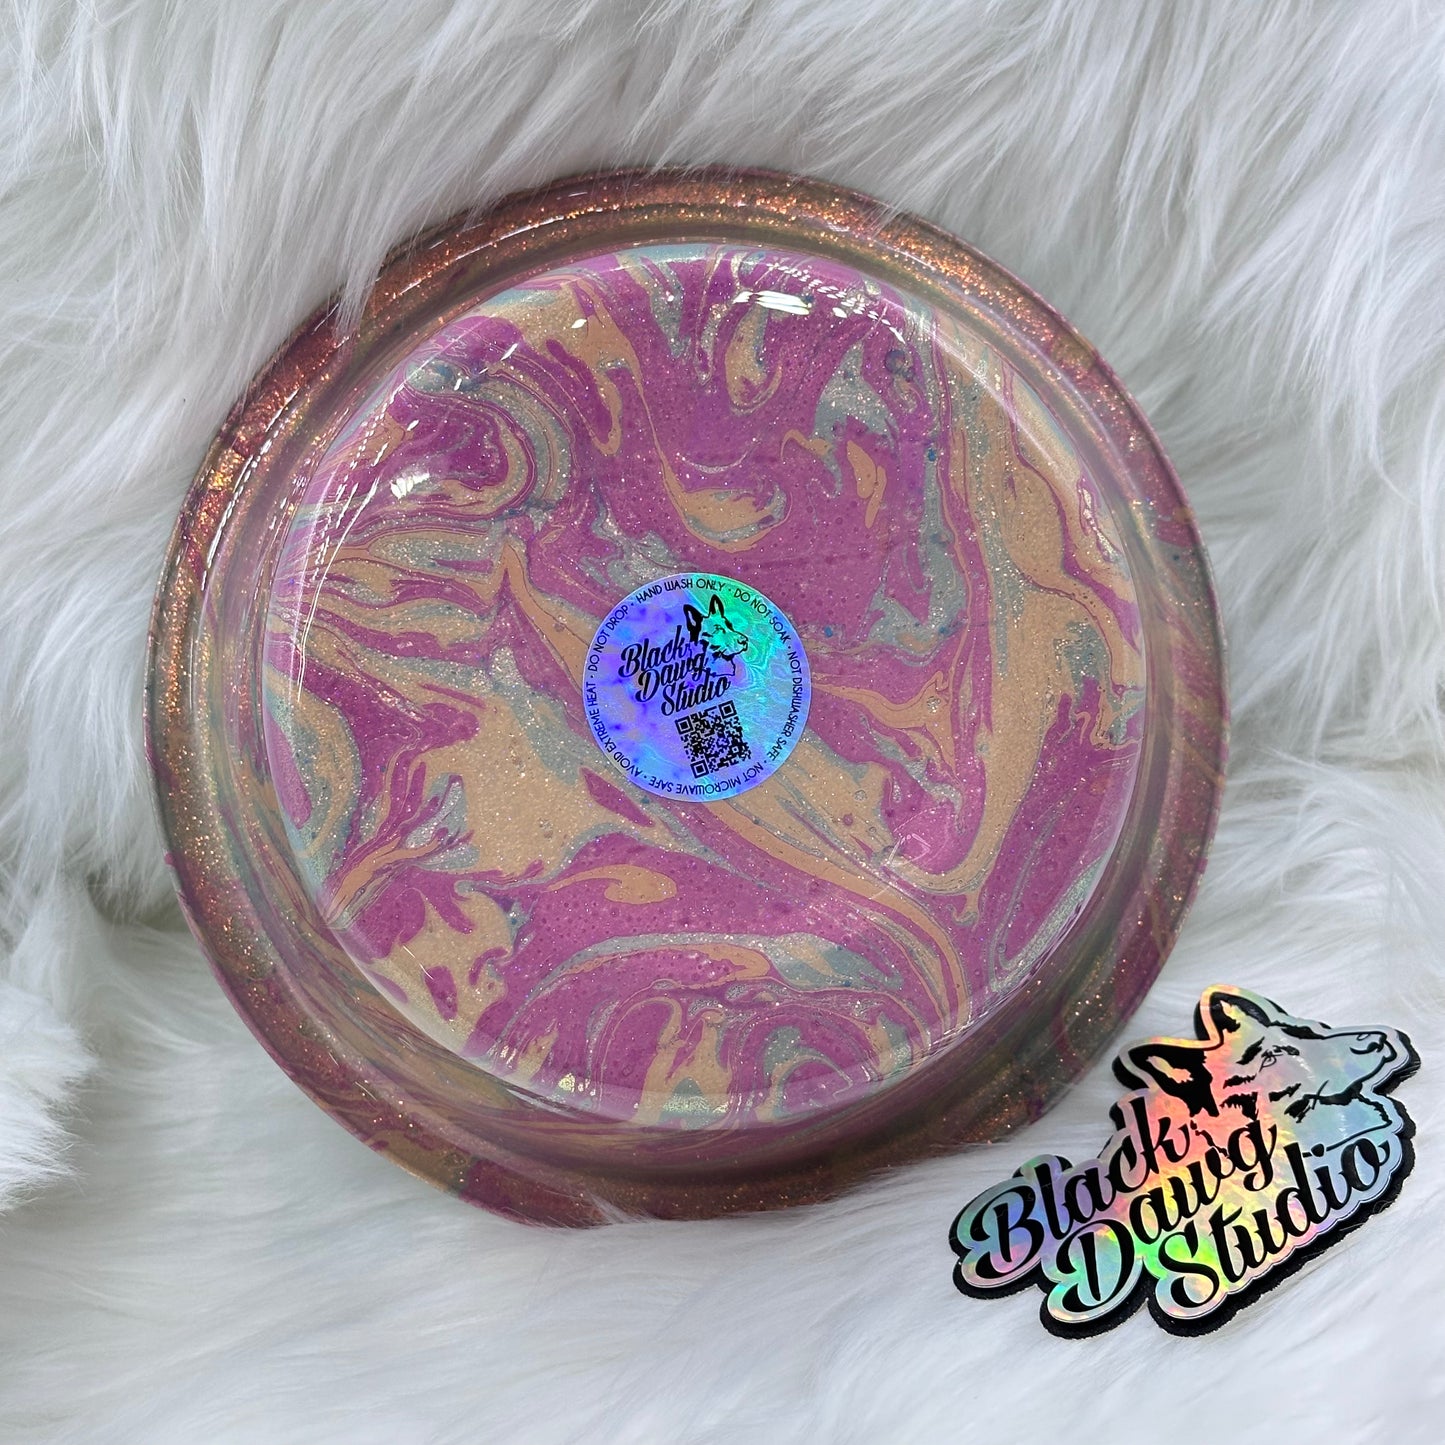 8-inch Dog Bowl - Glitter with Hydro Dip - Epoxy Tumbler for Dogs vs